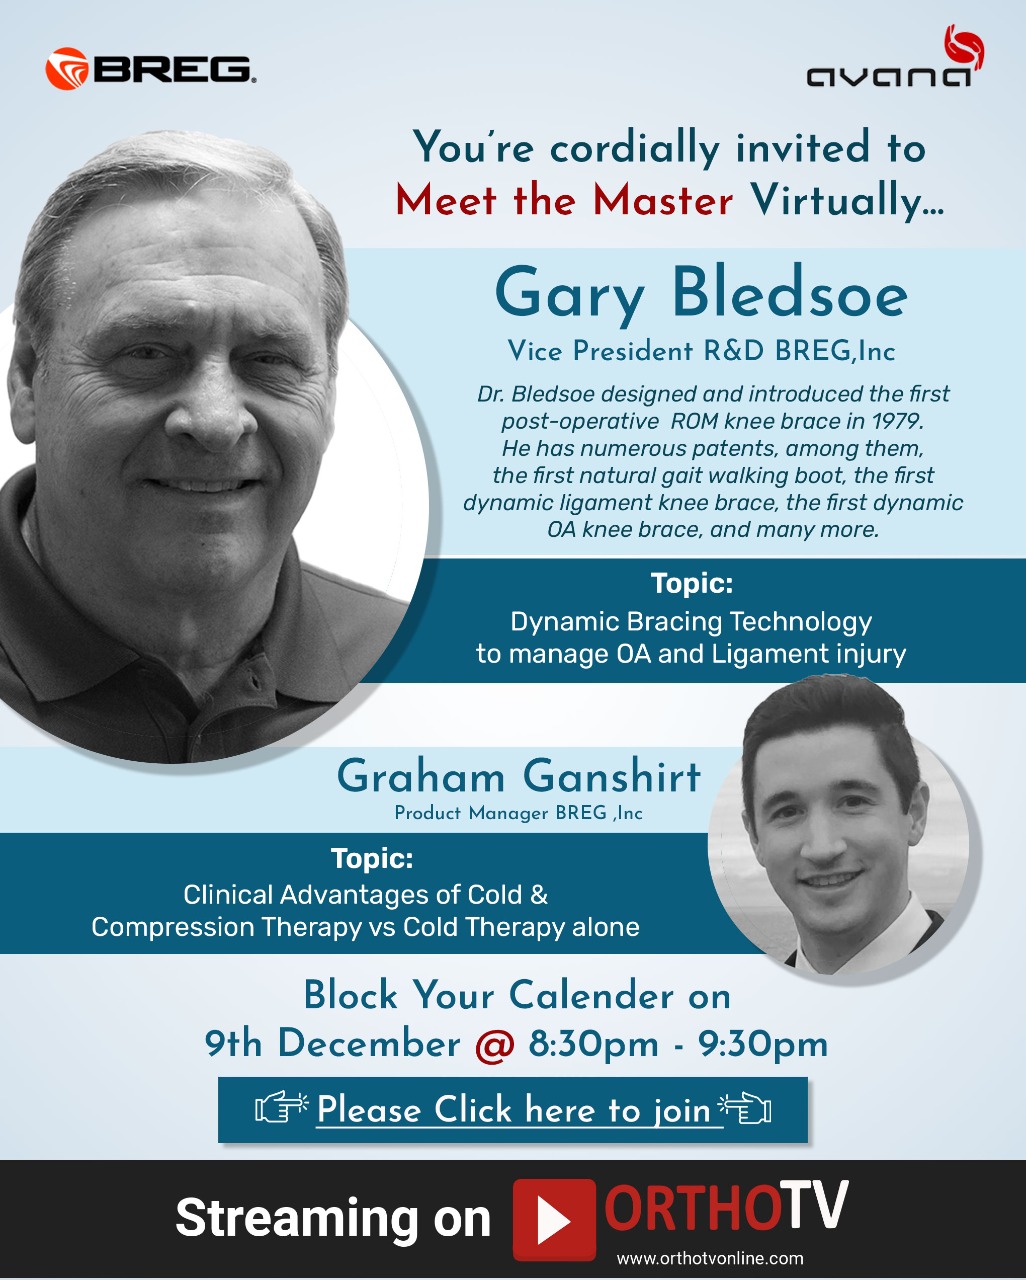 You're cordially invited to Meet the Master Virtually